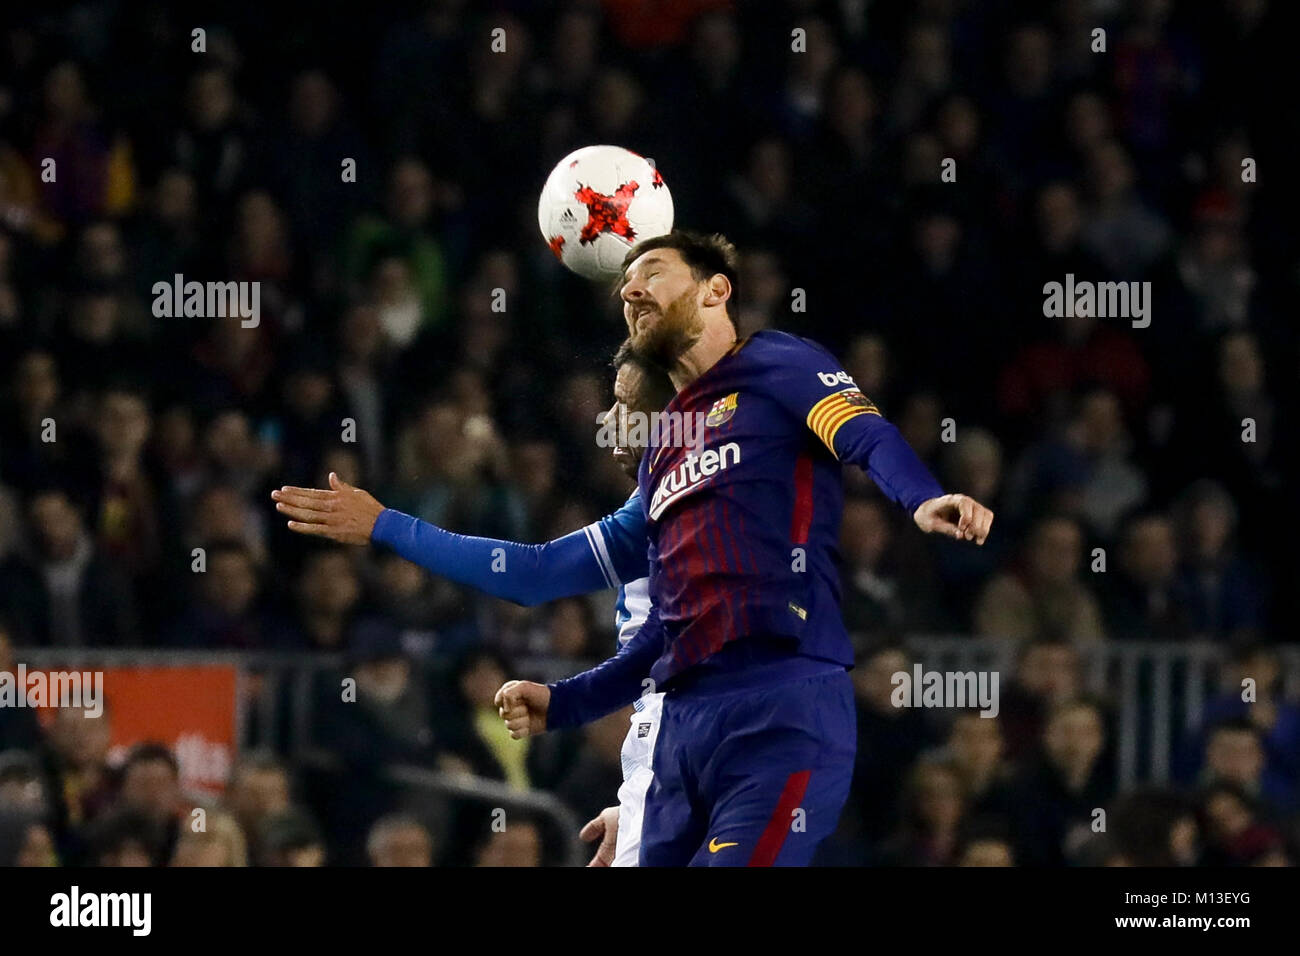 Camp Nou, Barcelona, Spain. 25th January, 2018. Lionel Messi fighting an aerial ball with Javi Fuego during the quarter finals of Copa de S.M. del Rey 17/18 on the match between Fc Barcelona and Rcd Espanyol at Camp Nou, Barcelona, Spain. Credit: G. Loinaz/Alamy Live News Stock Photo